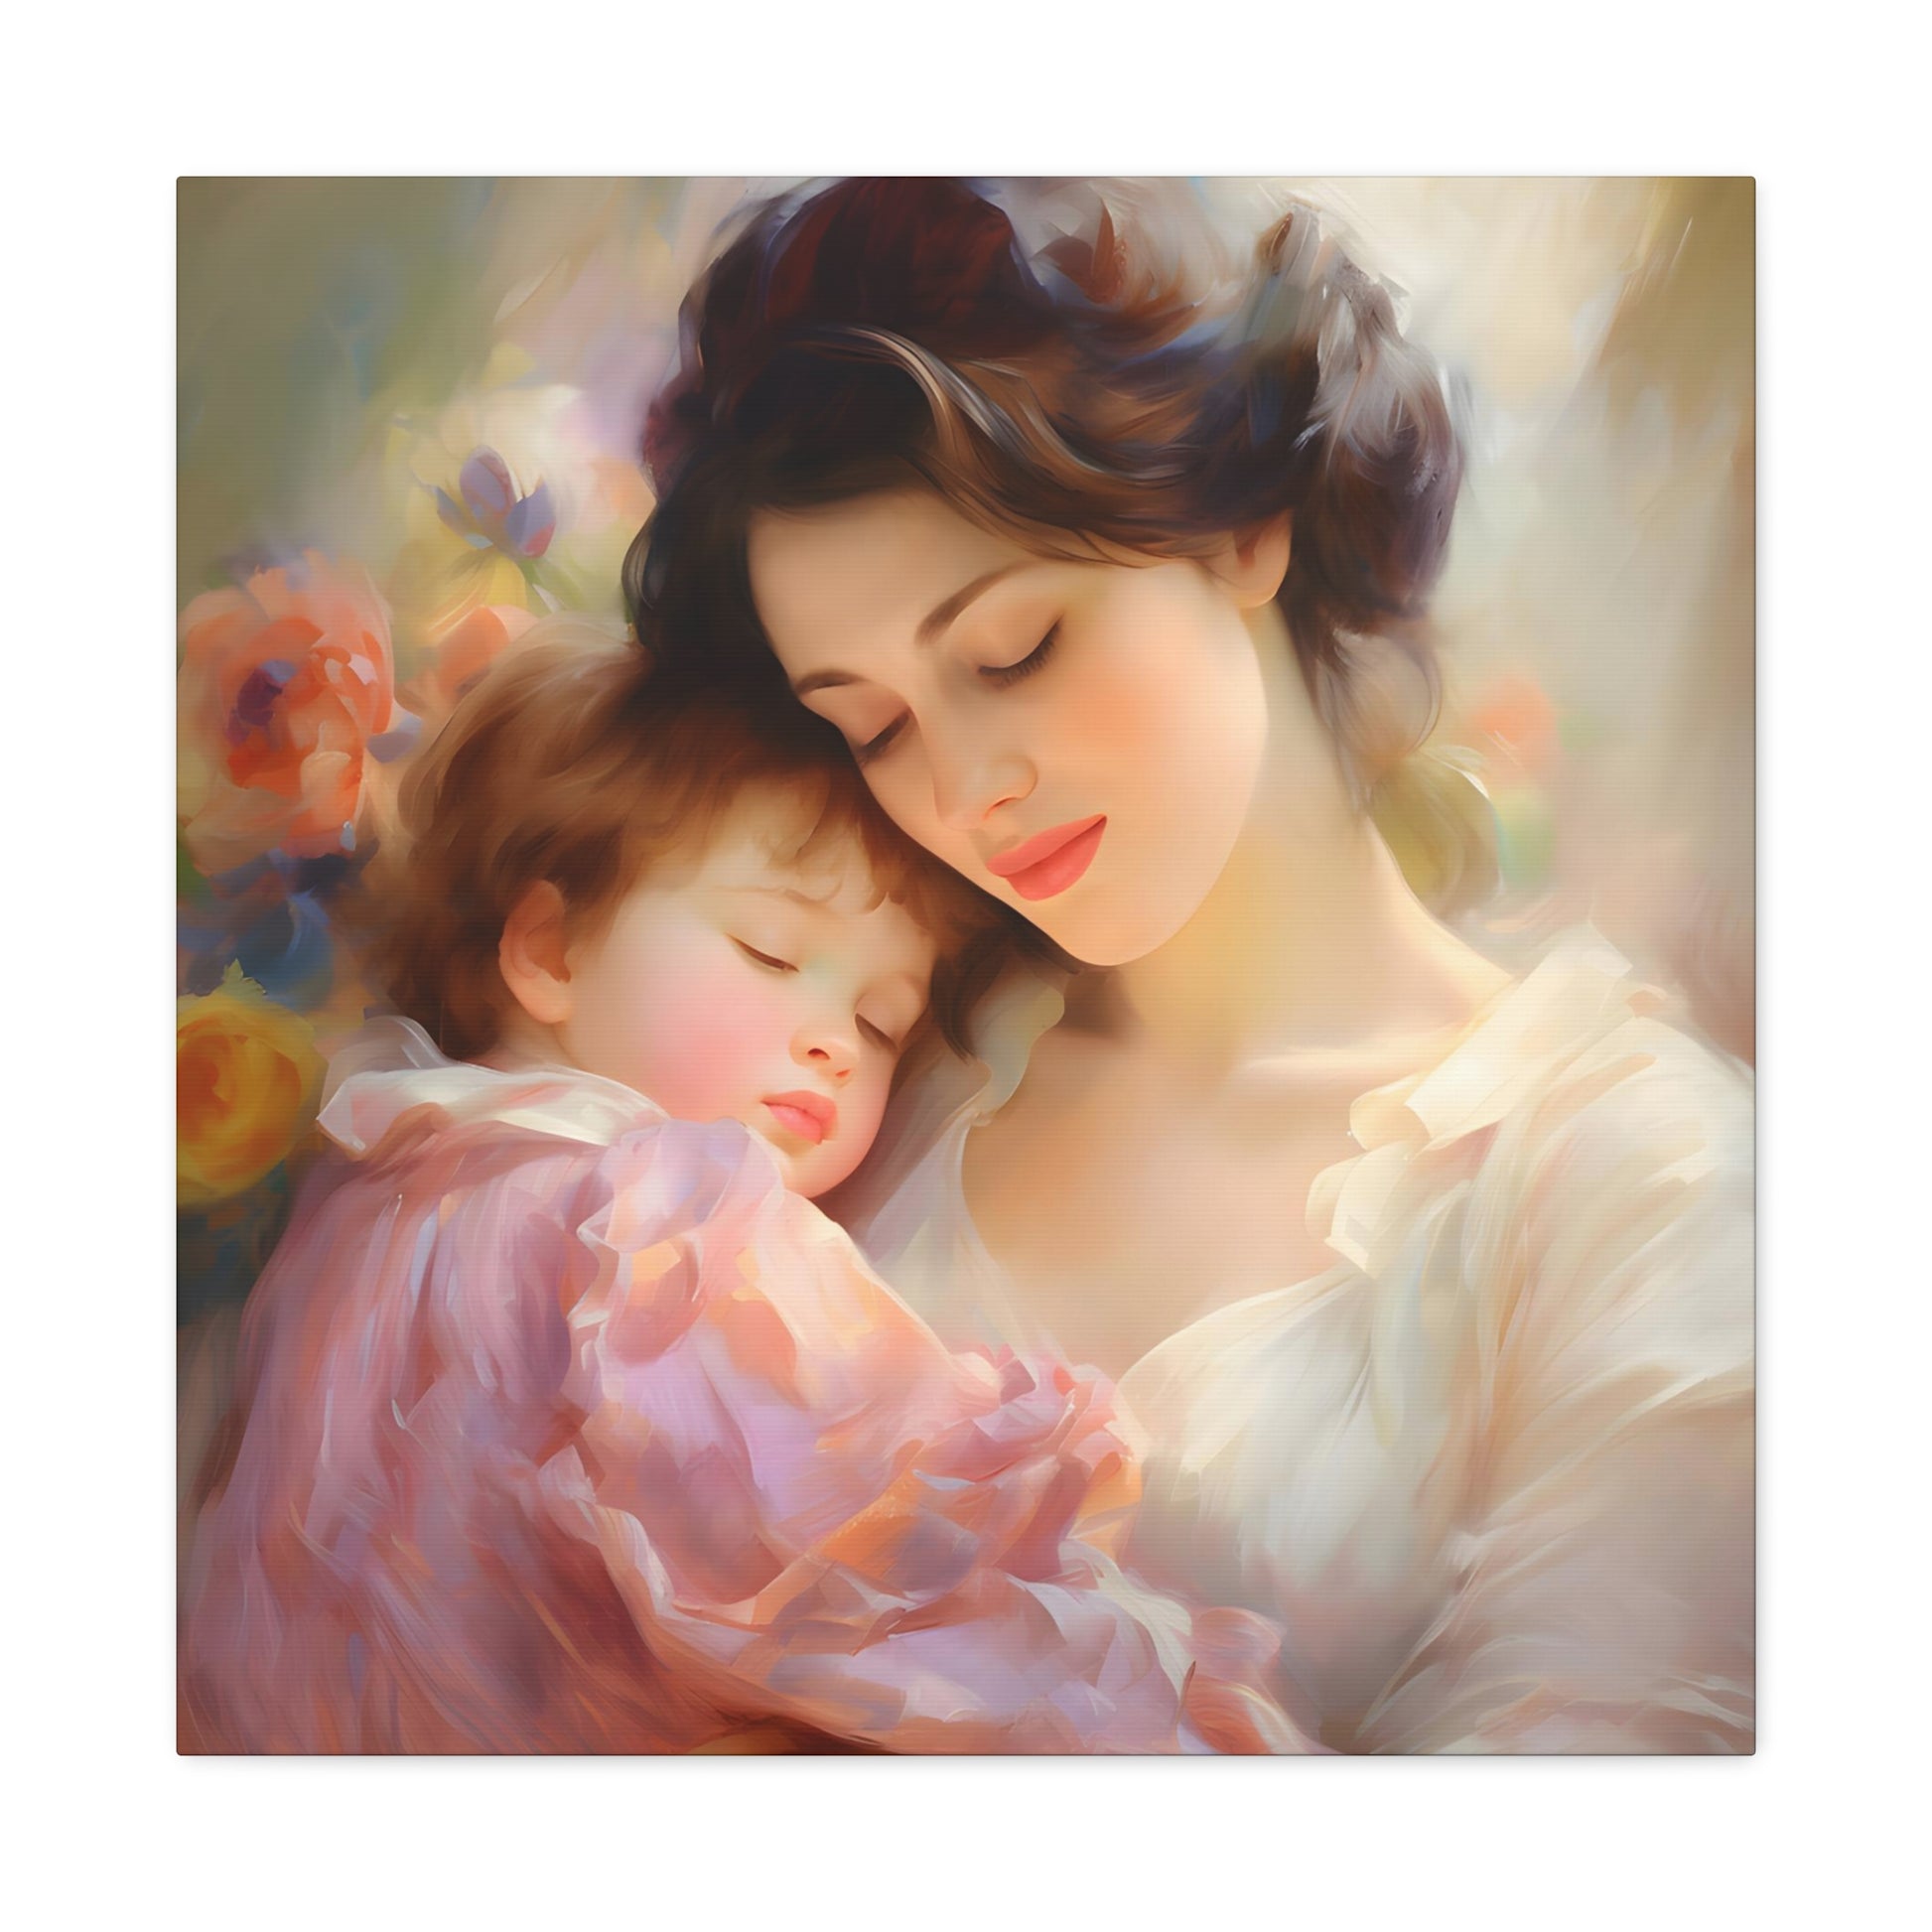 image 4 Clara Sutton's 'Maternal Serenity,' an Impressionist-inspired painting, depicts the tender bond between mother and child with a warm palette and diffused light, exuding tranquility.